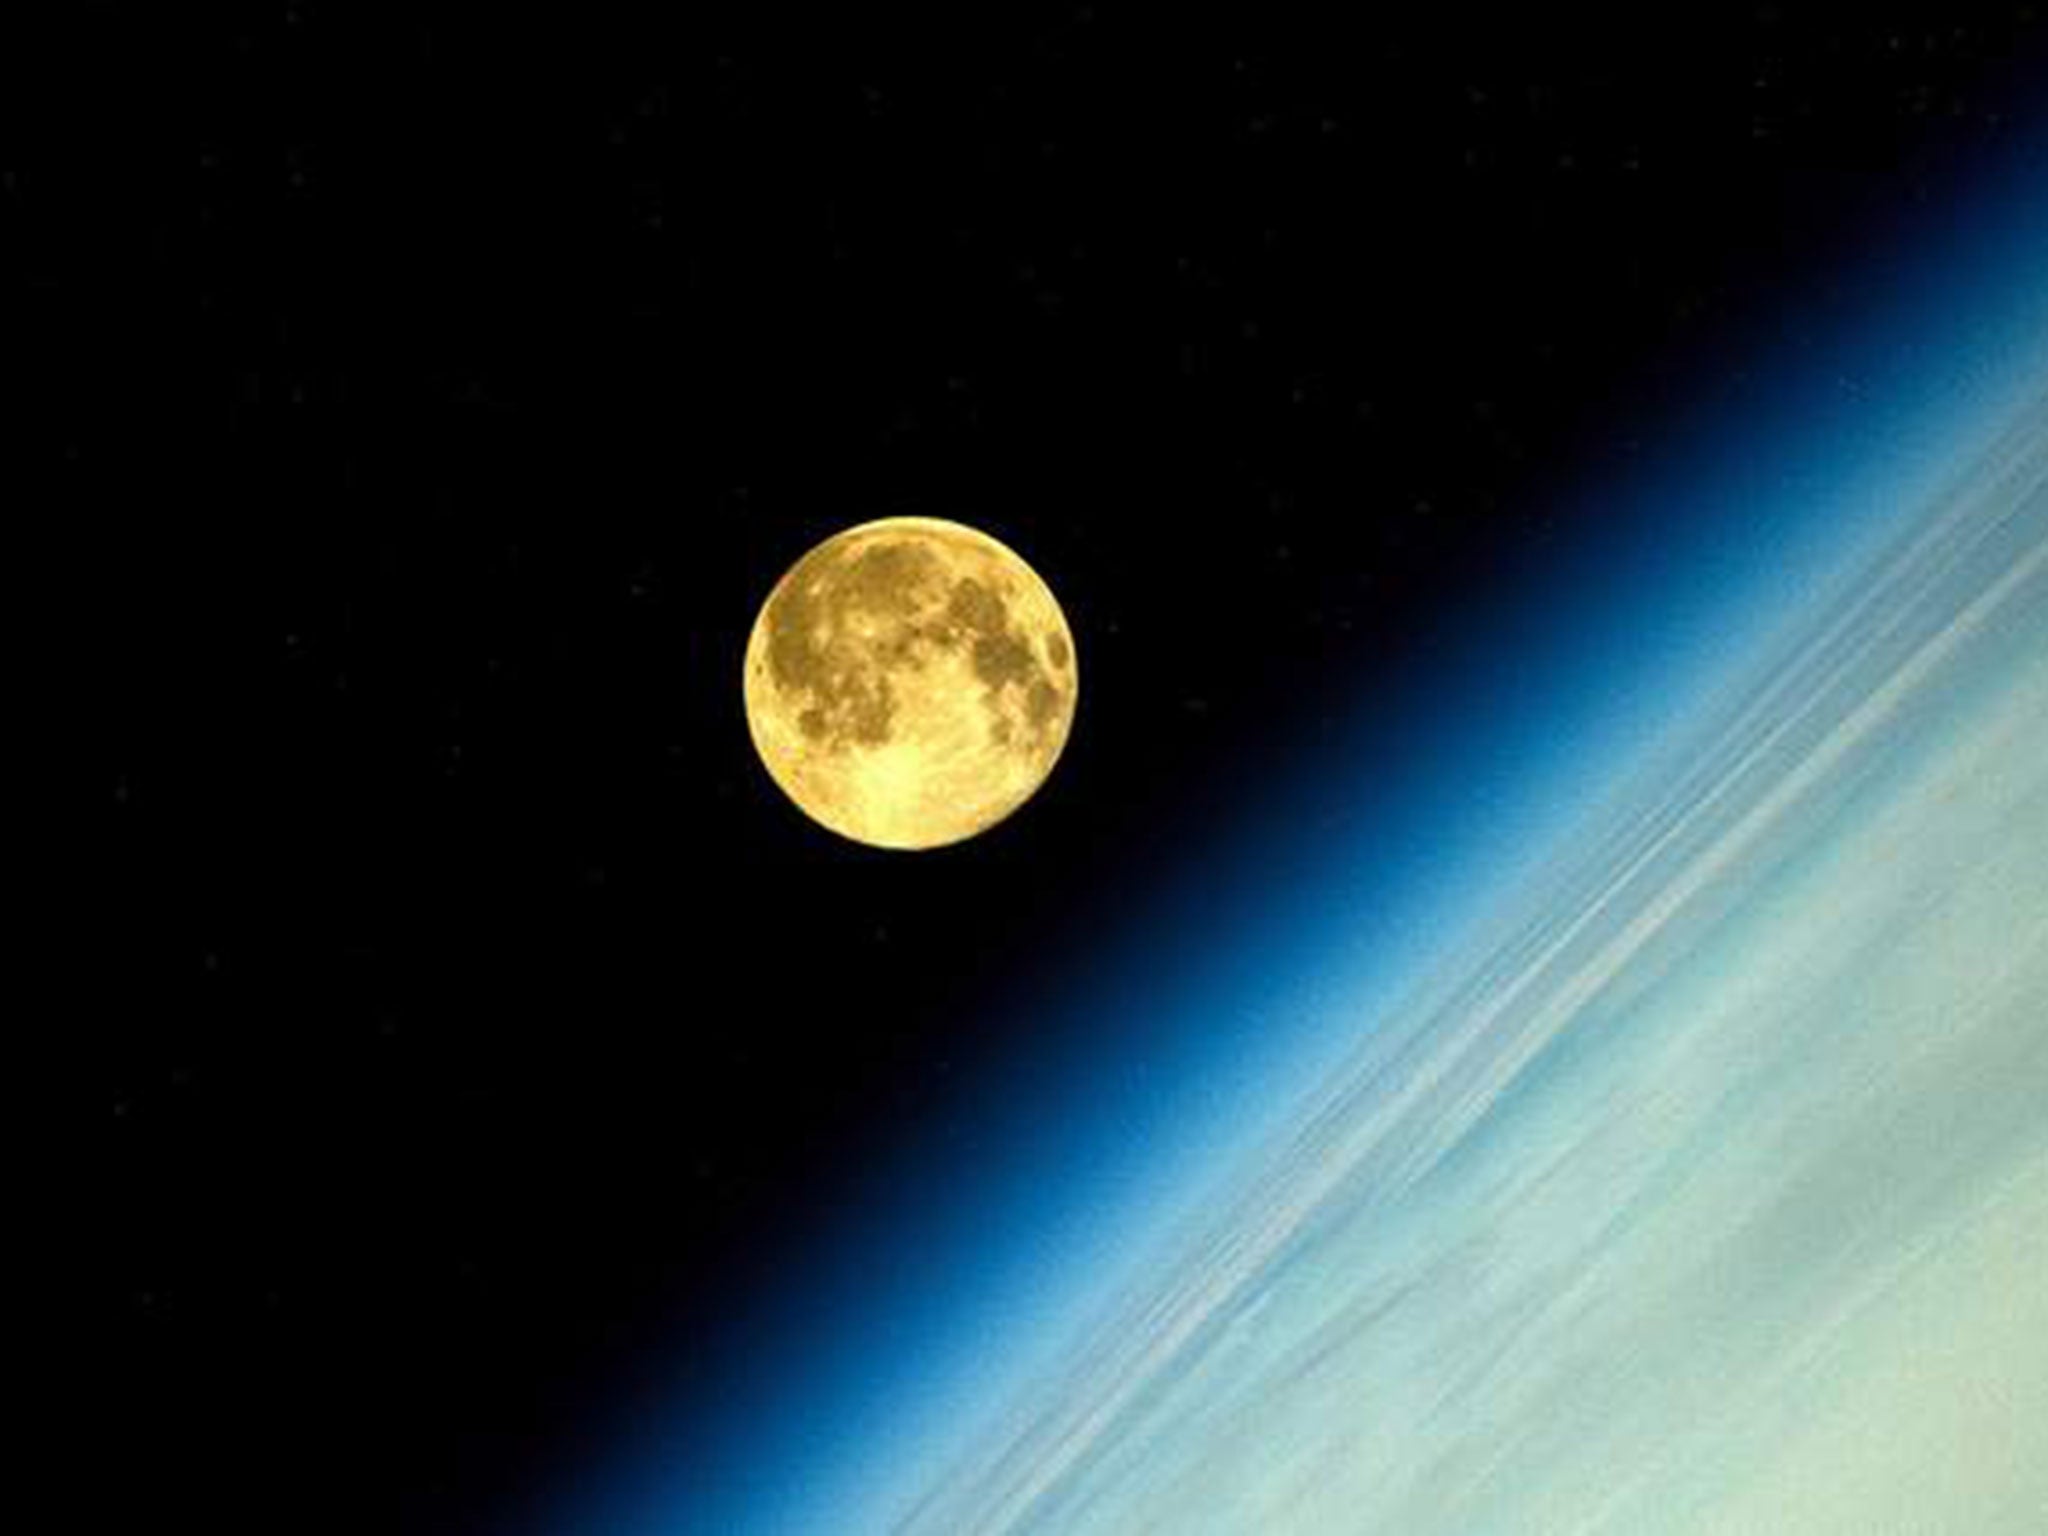 The pictures of the supermoon from space were taken by cosmonaut Oleg Artemyev